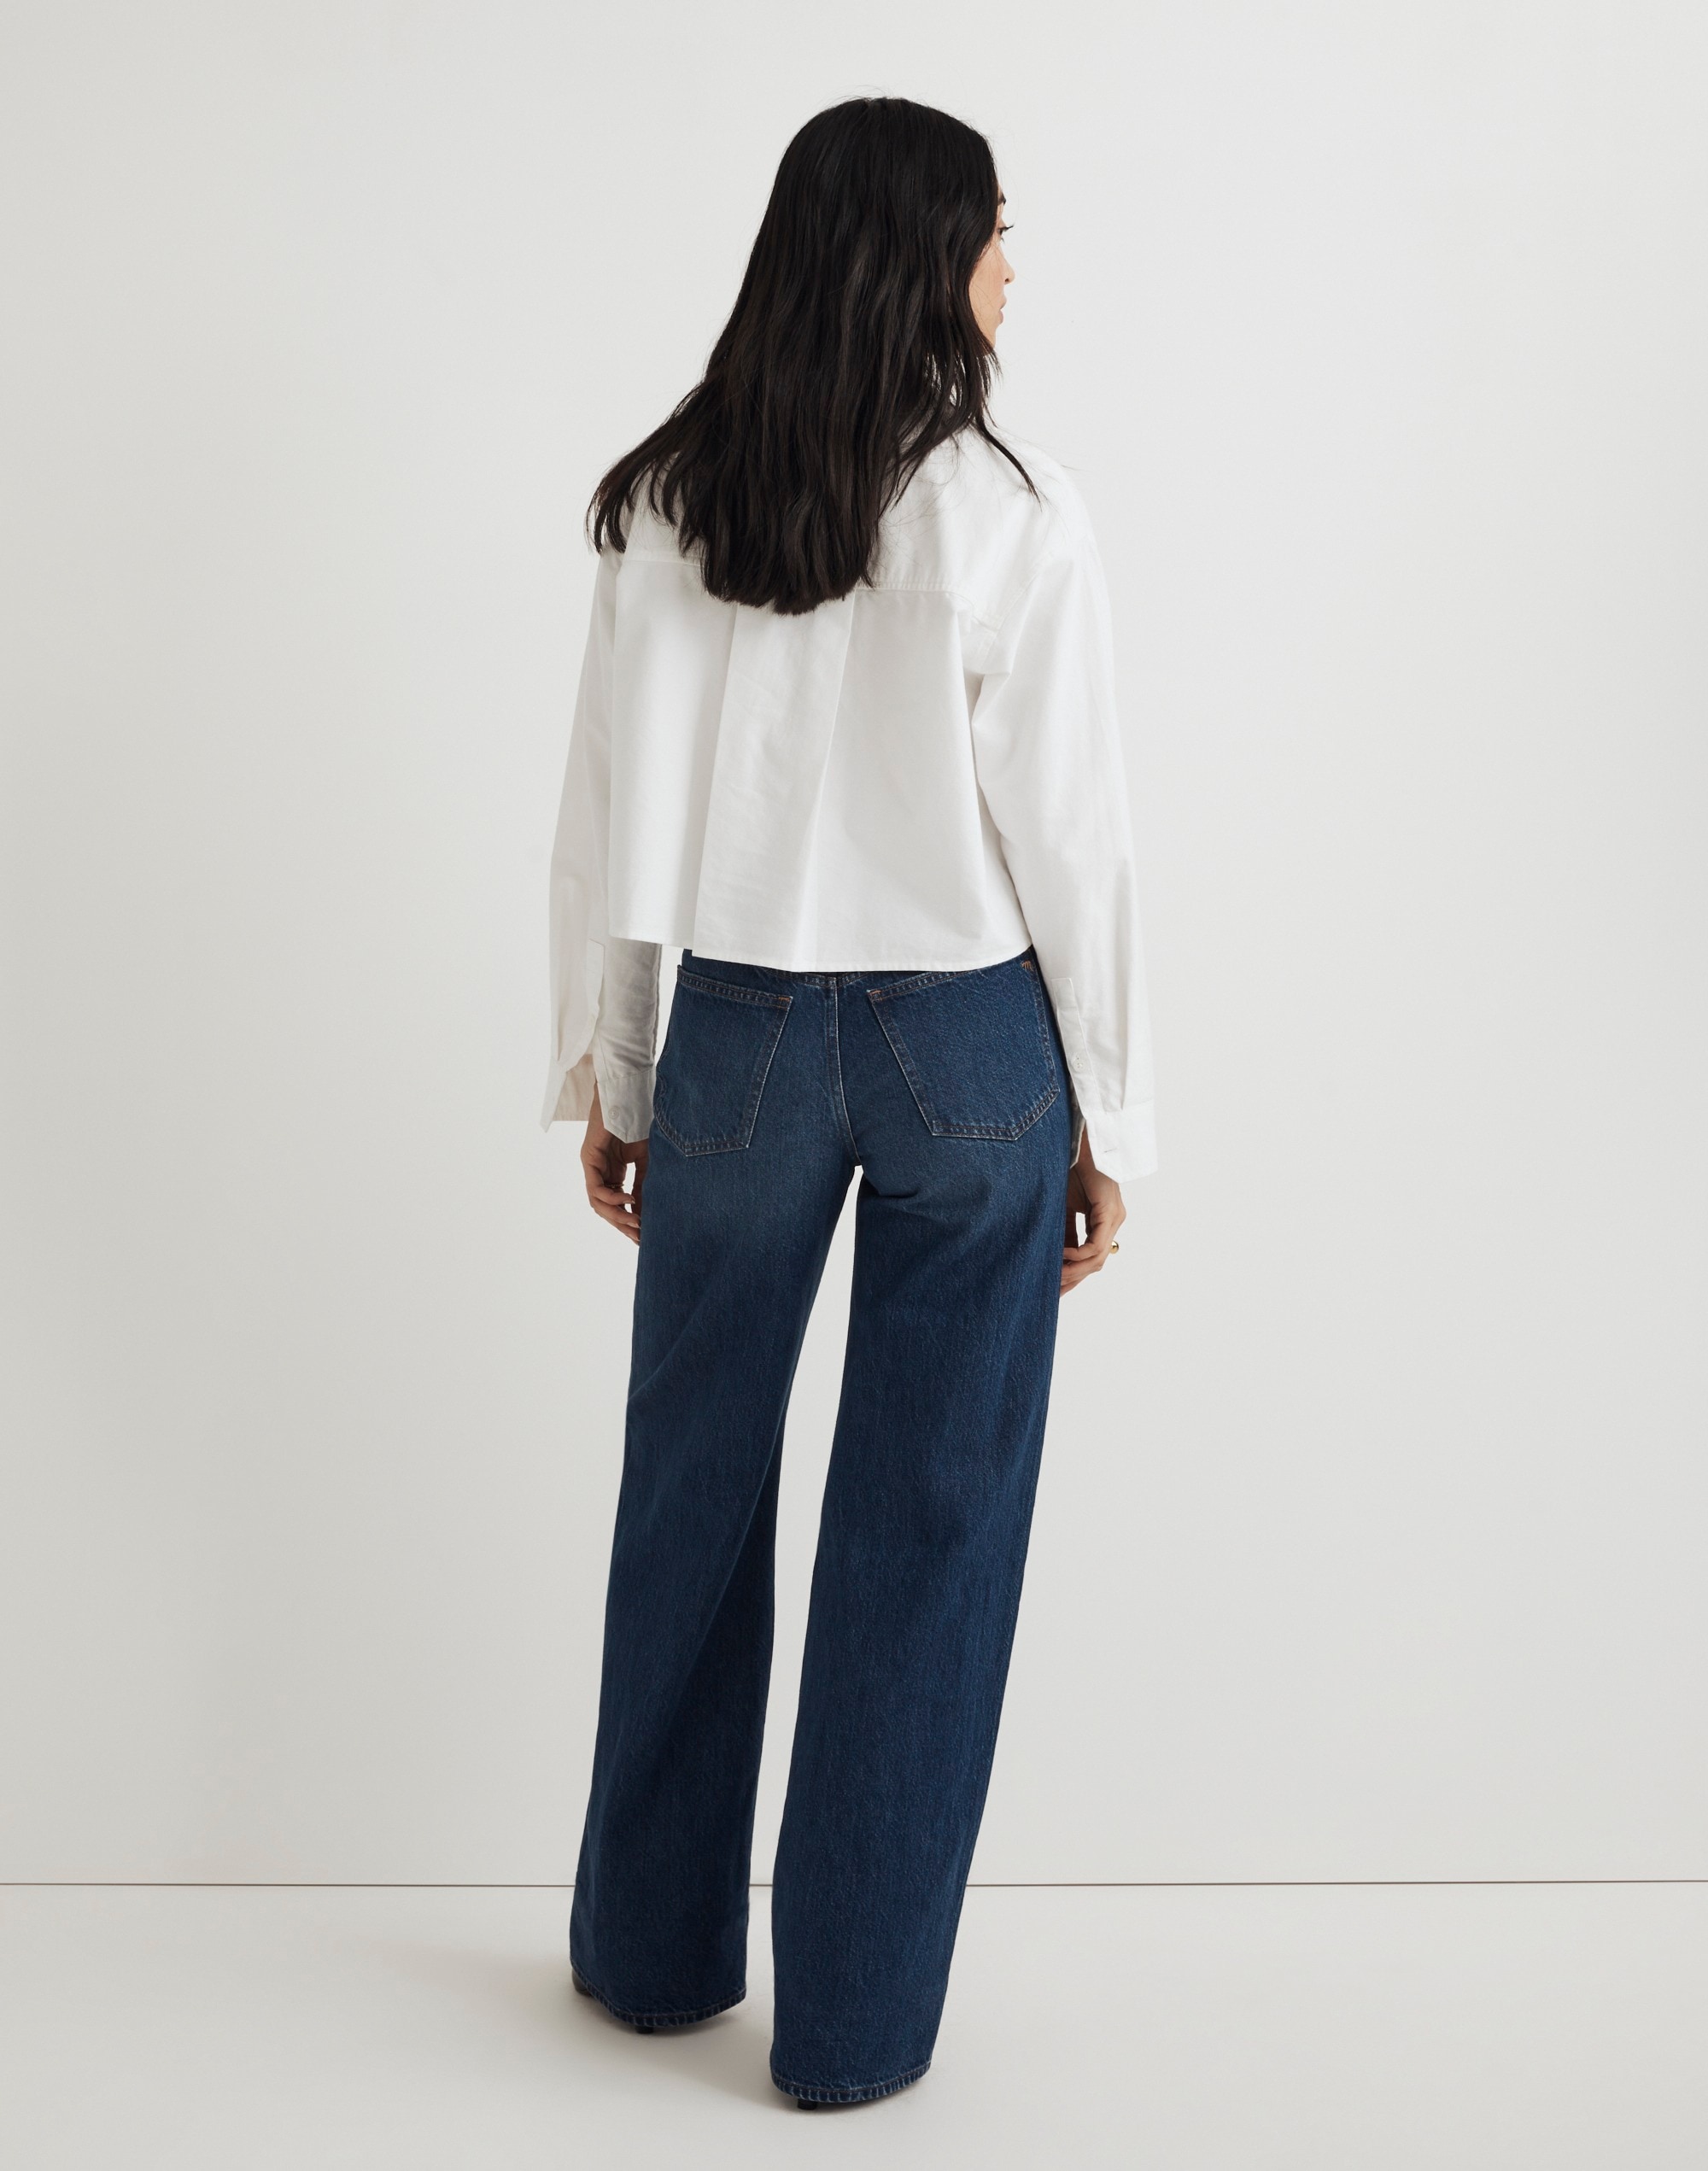 Tall Superwide-Leg Jeans in Vietor Wash